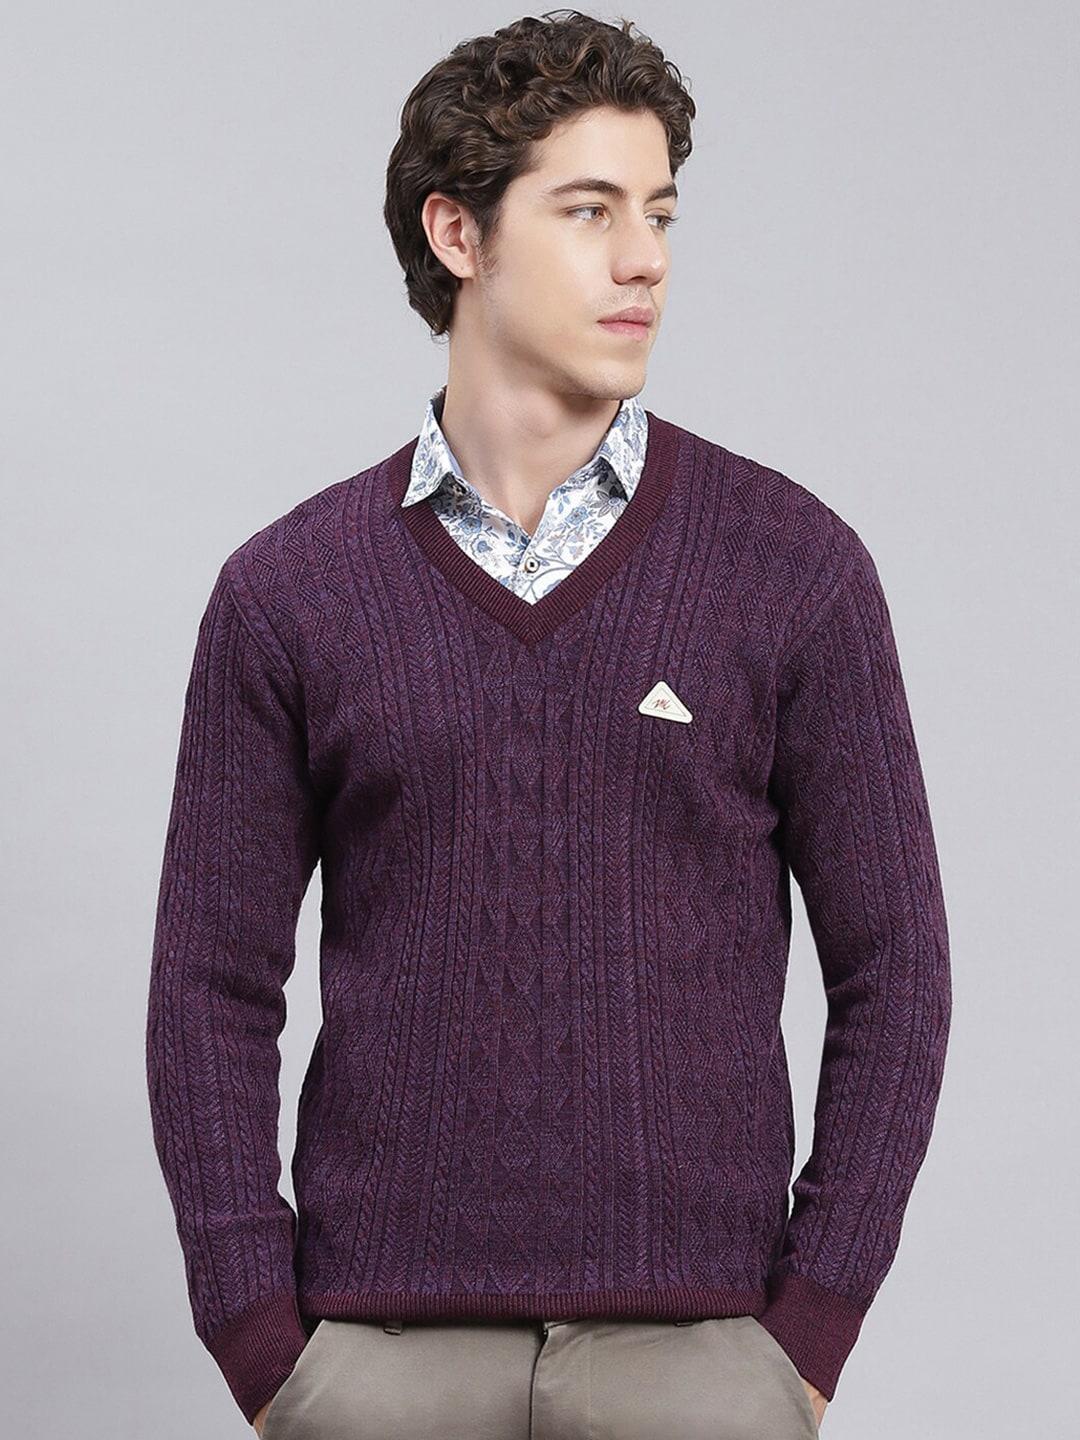 Monte Carlo Cable Knit Woollen Pullover